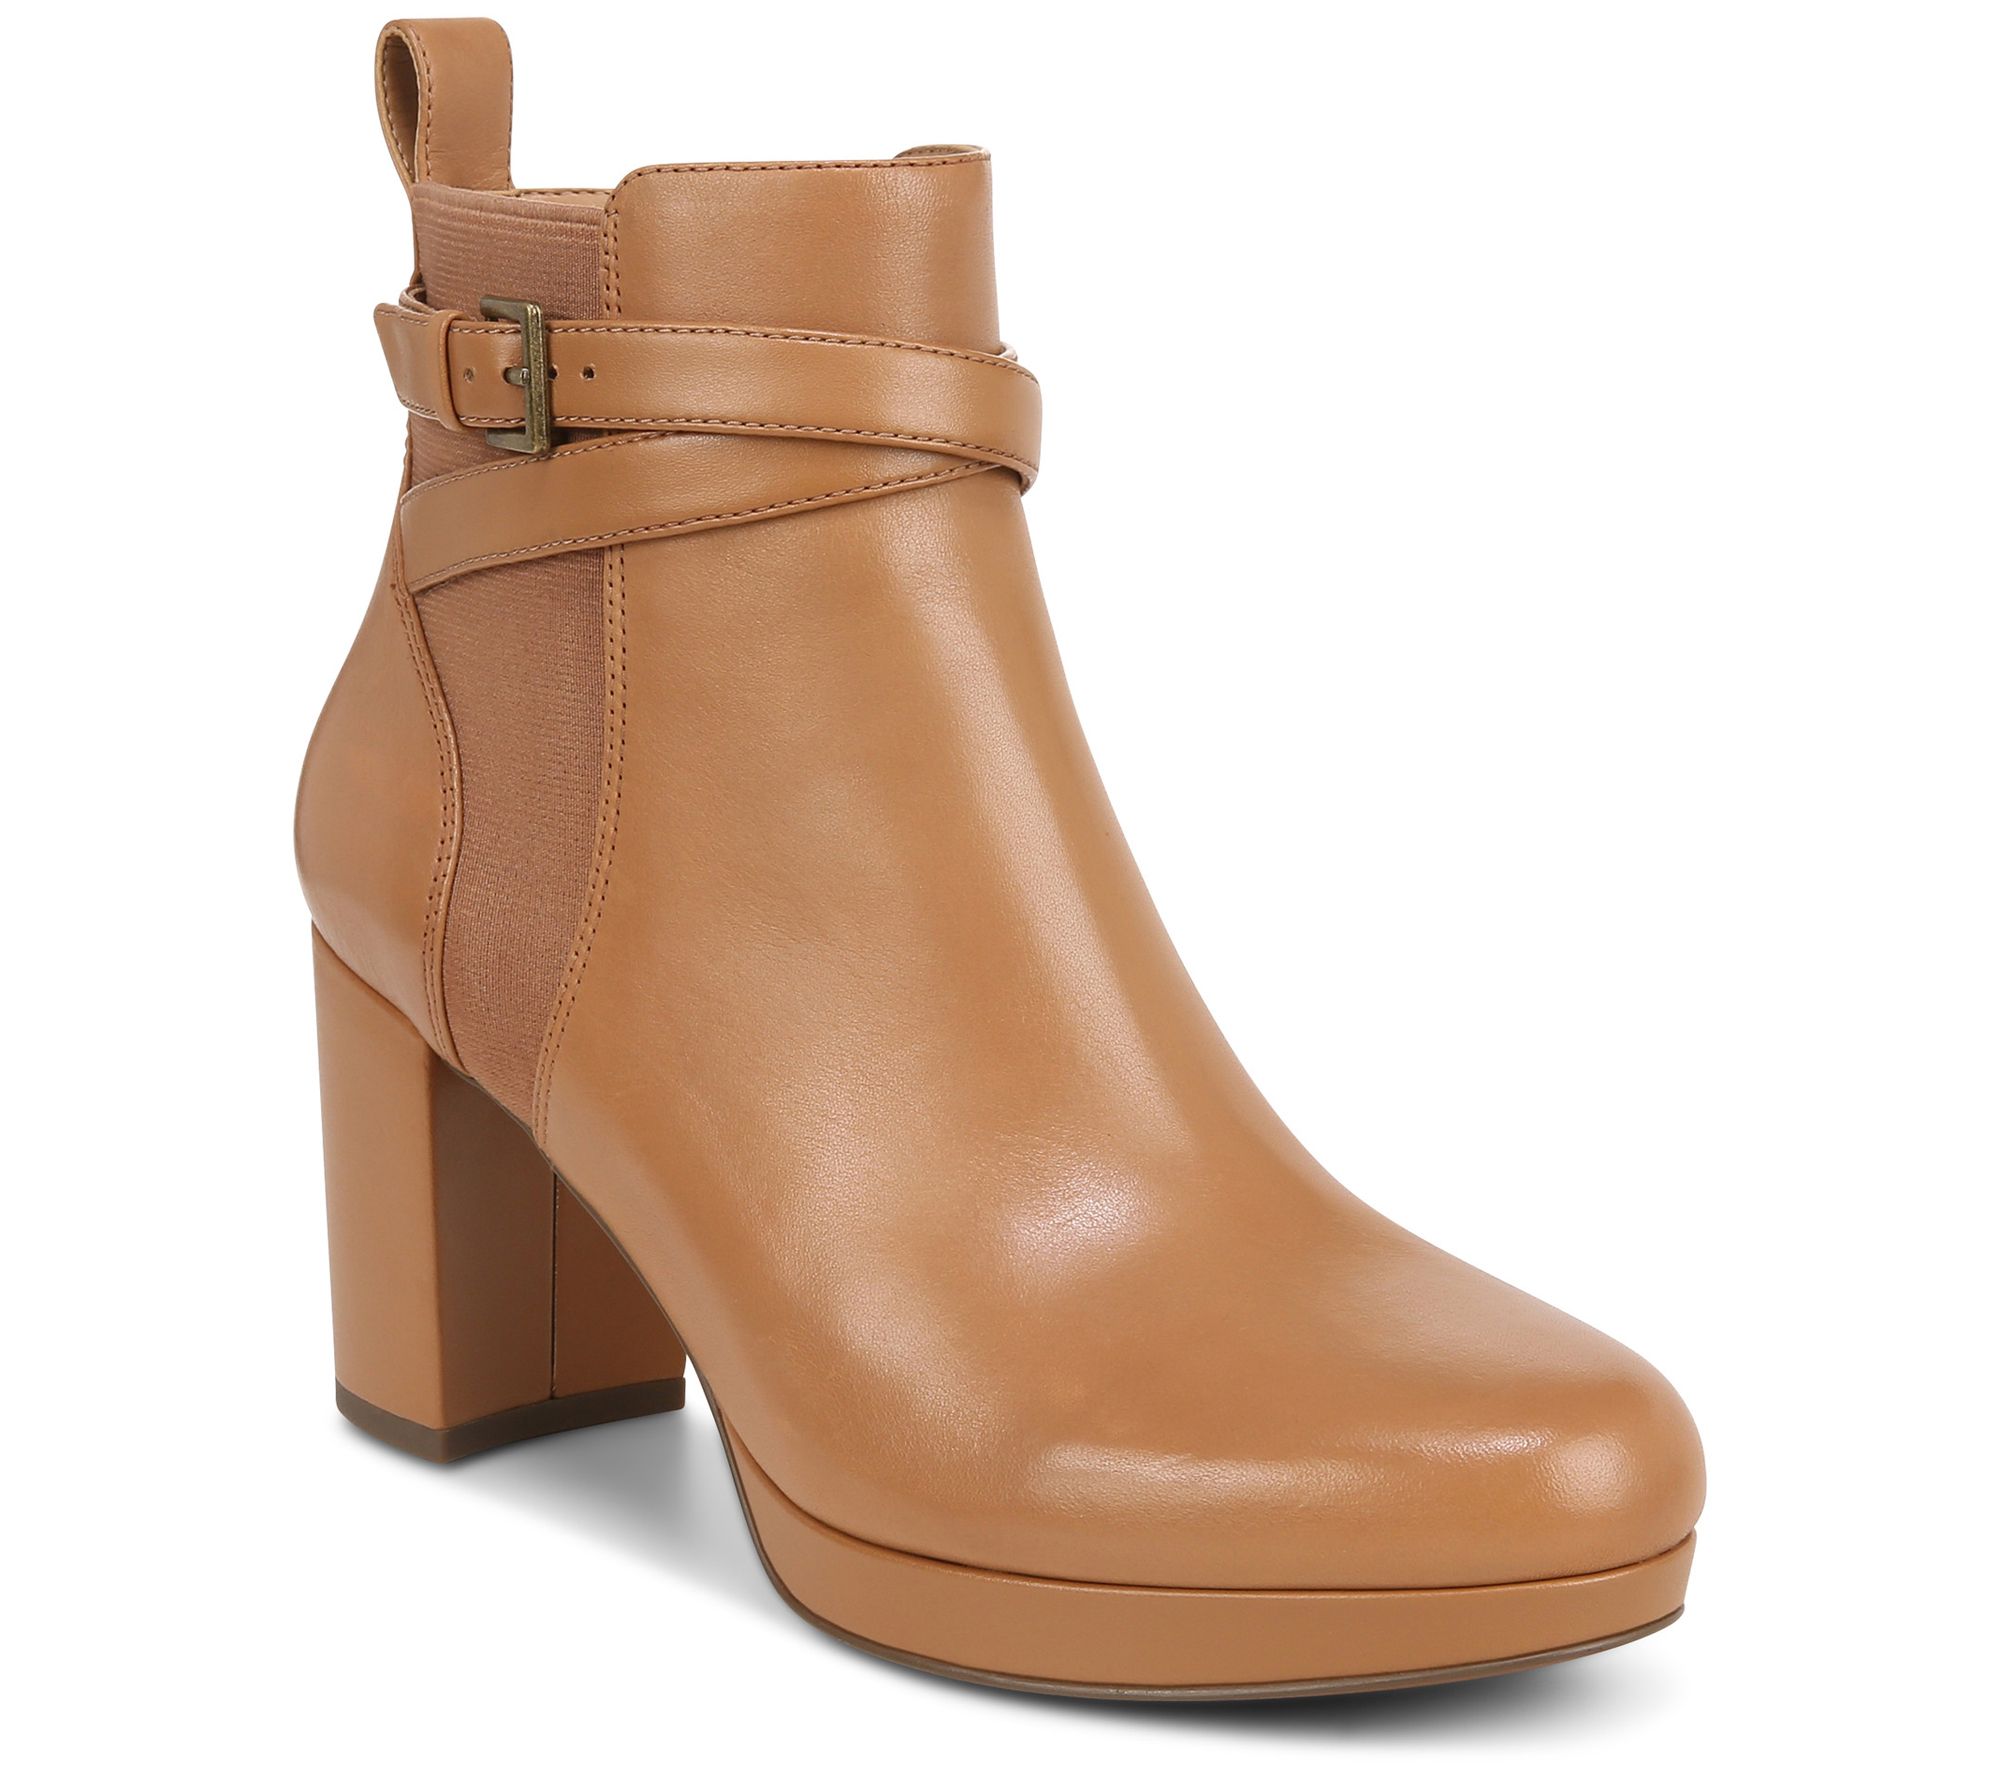 Closet staple: Flattering tan ankle boots under $100 - Extra